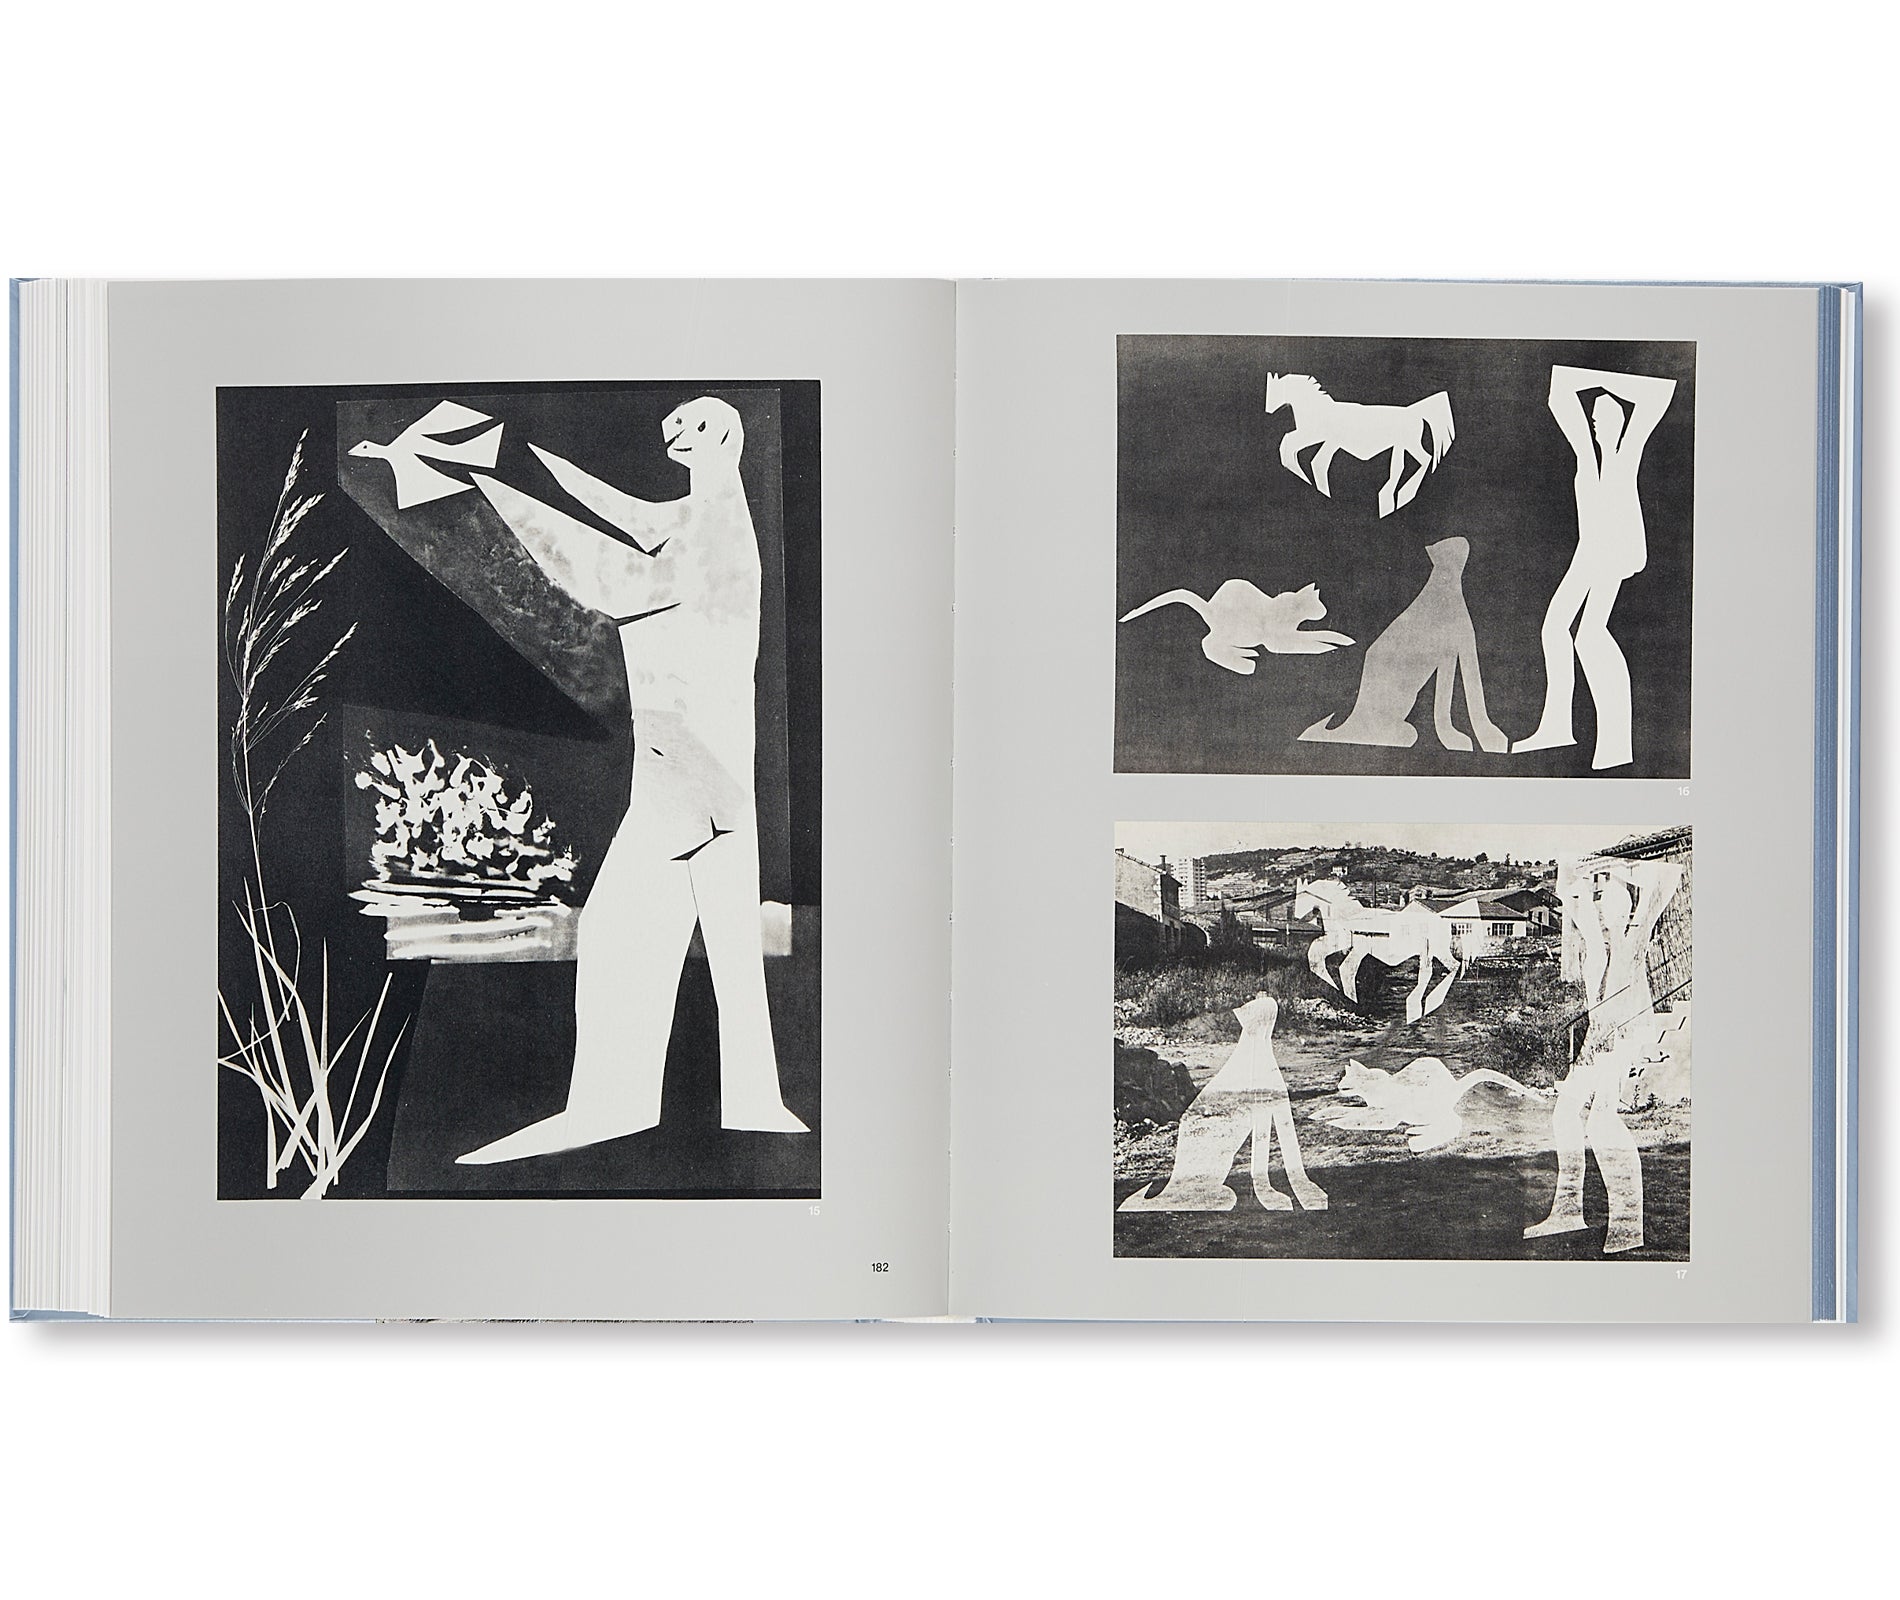 PICASSO CUT PAPERS by Pablo Picasso – twelvebooks